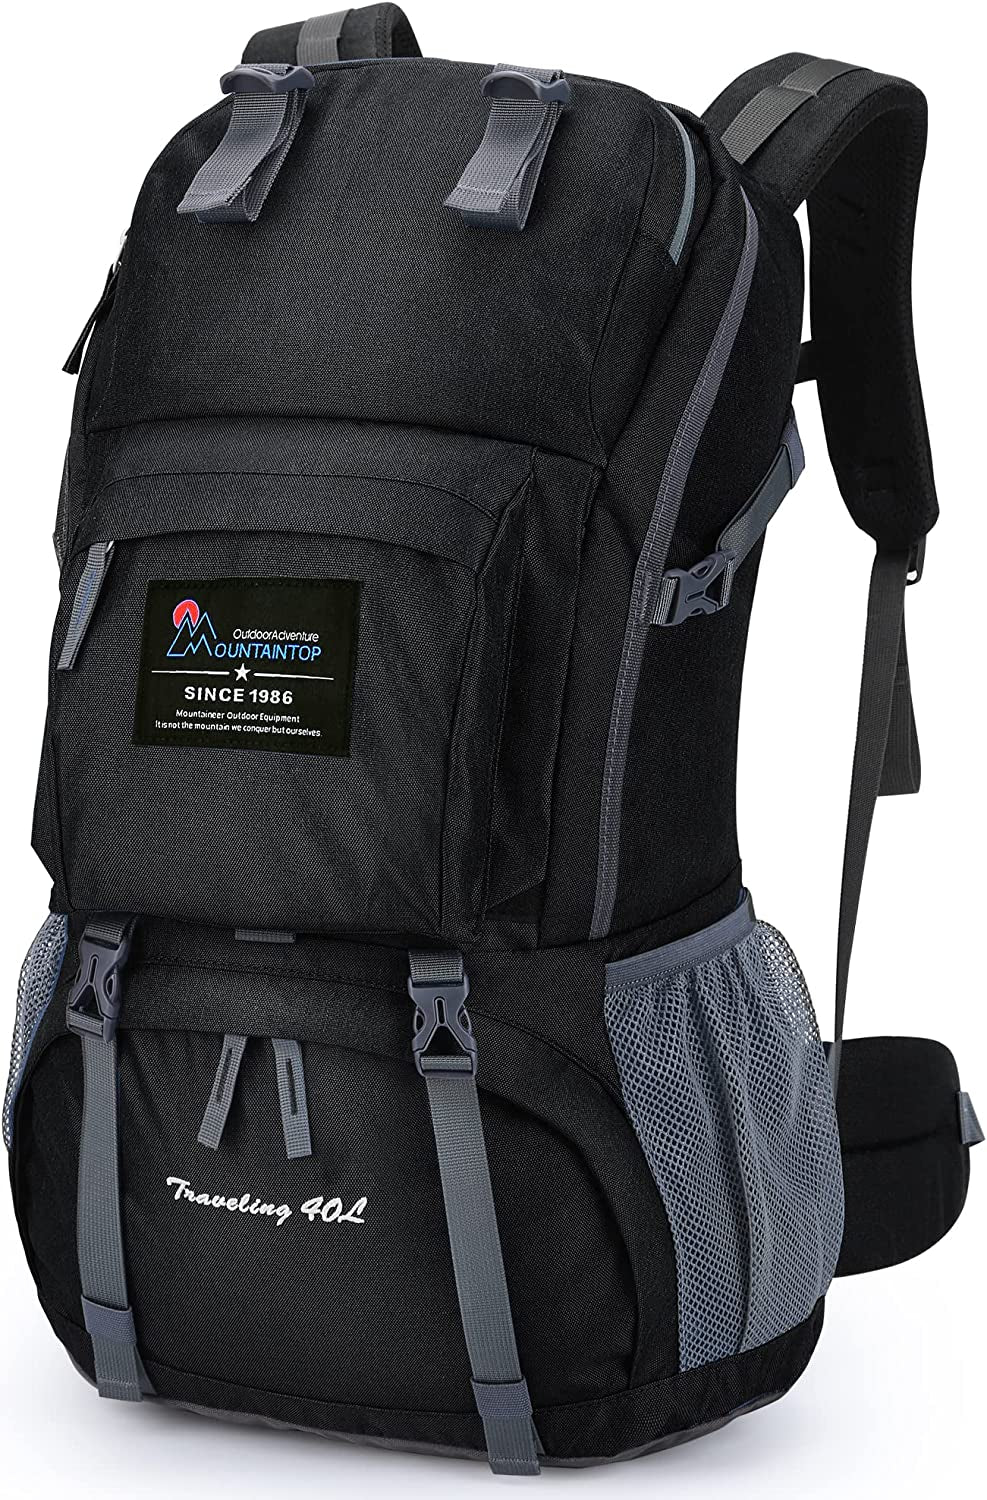 "Premium 40L Hiking Backpack with Rain Cover - Ideal for Outdoor Adventures!"